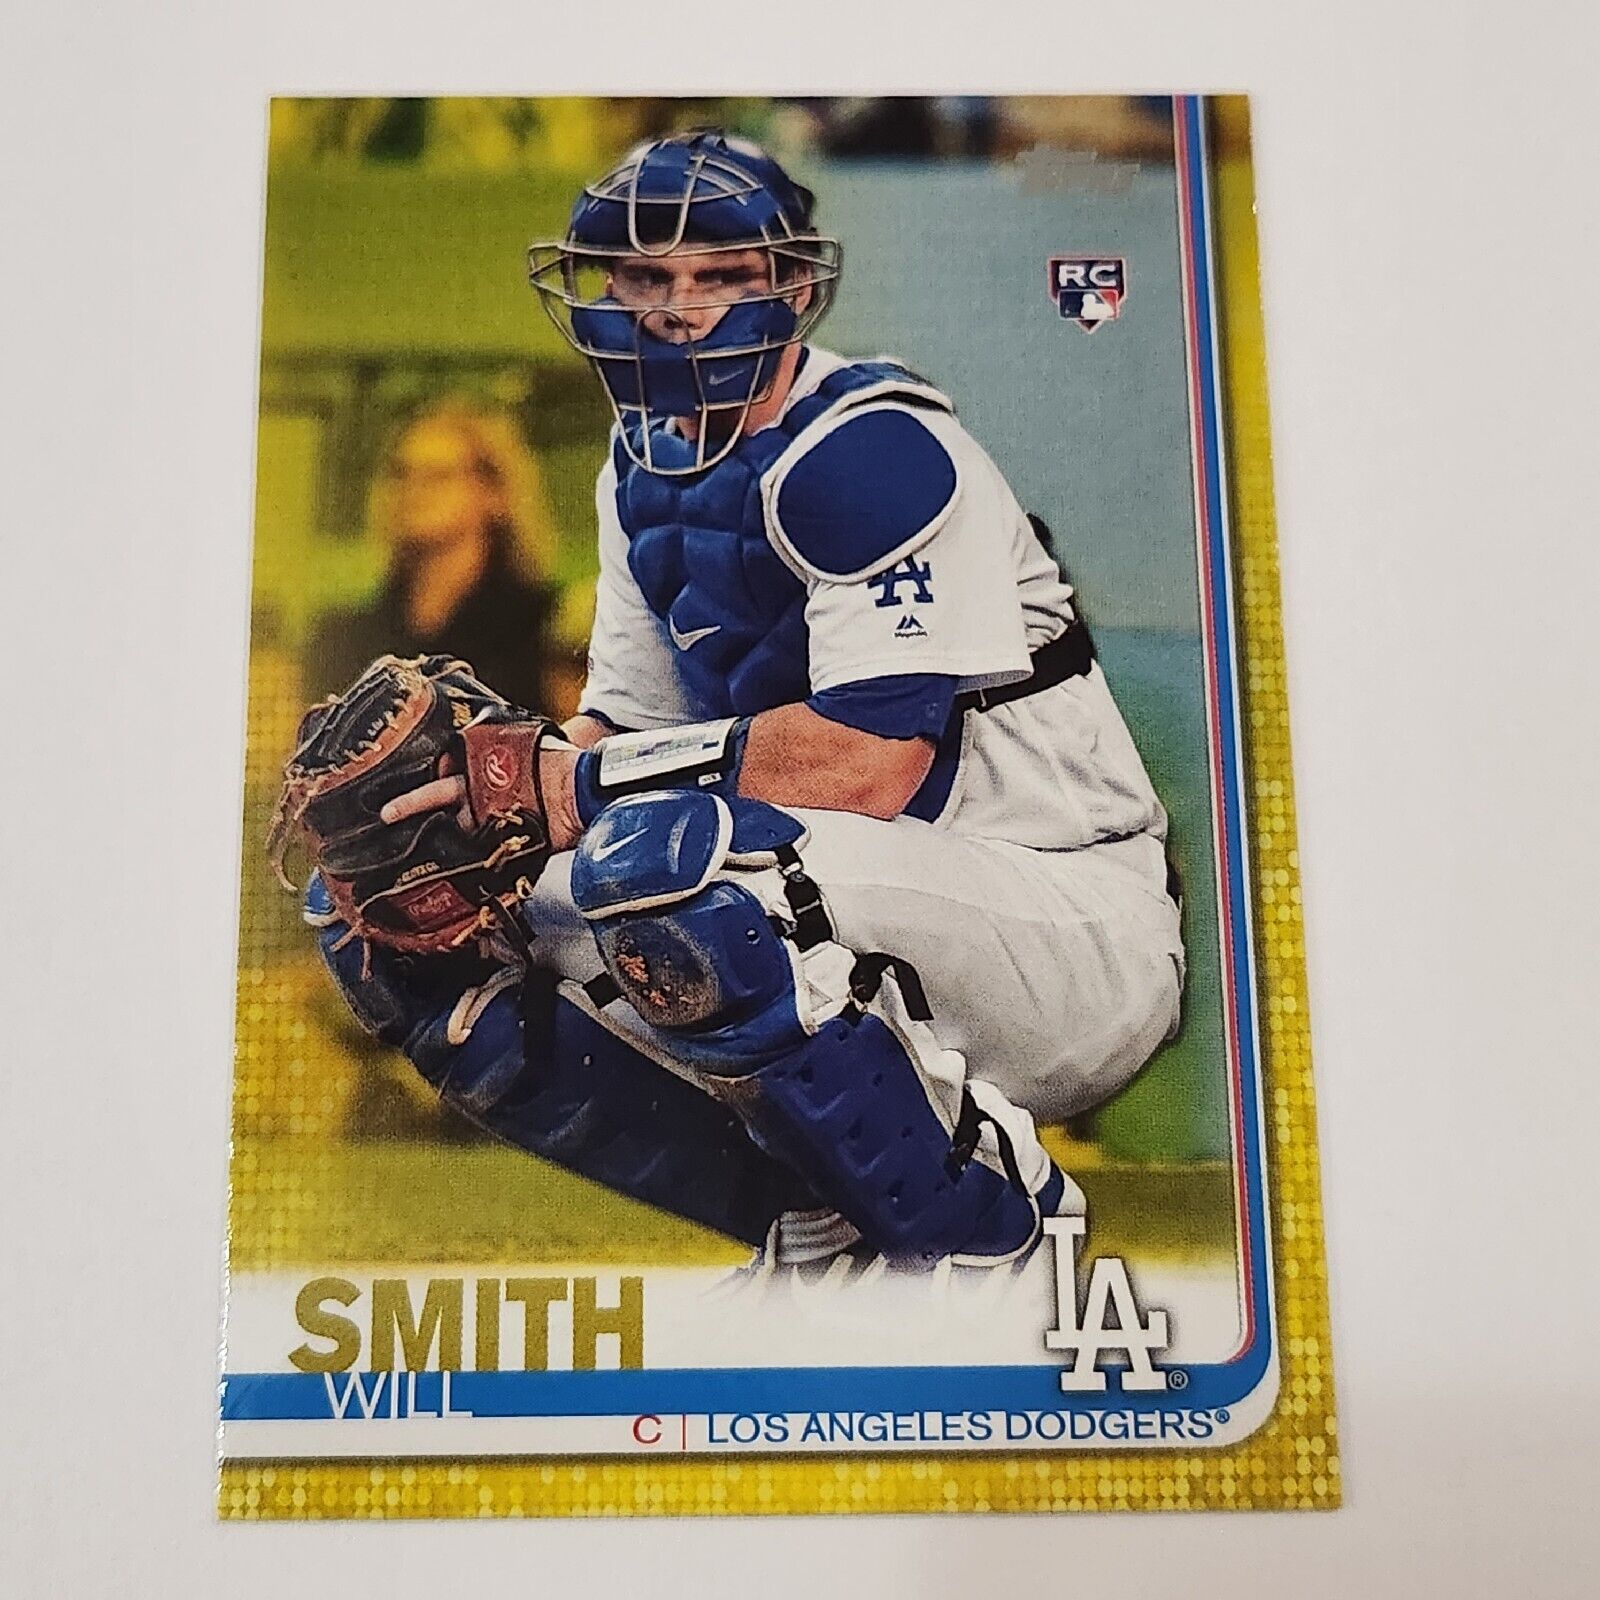 2019 Topps Update Will Smith RC Yellow Parallel Dodgers